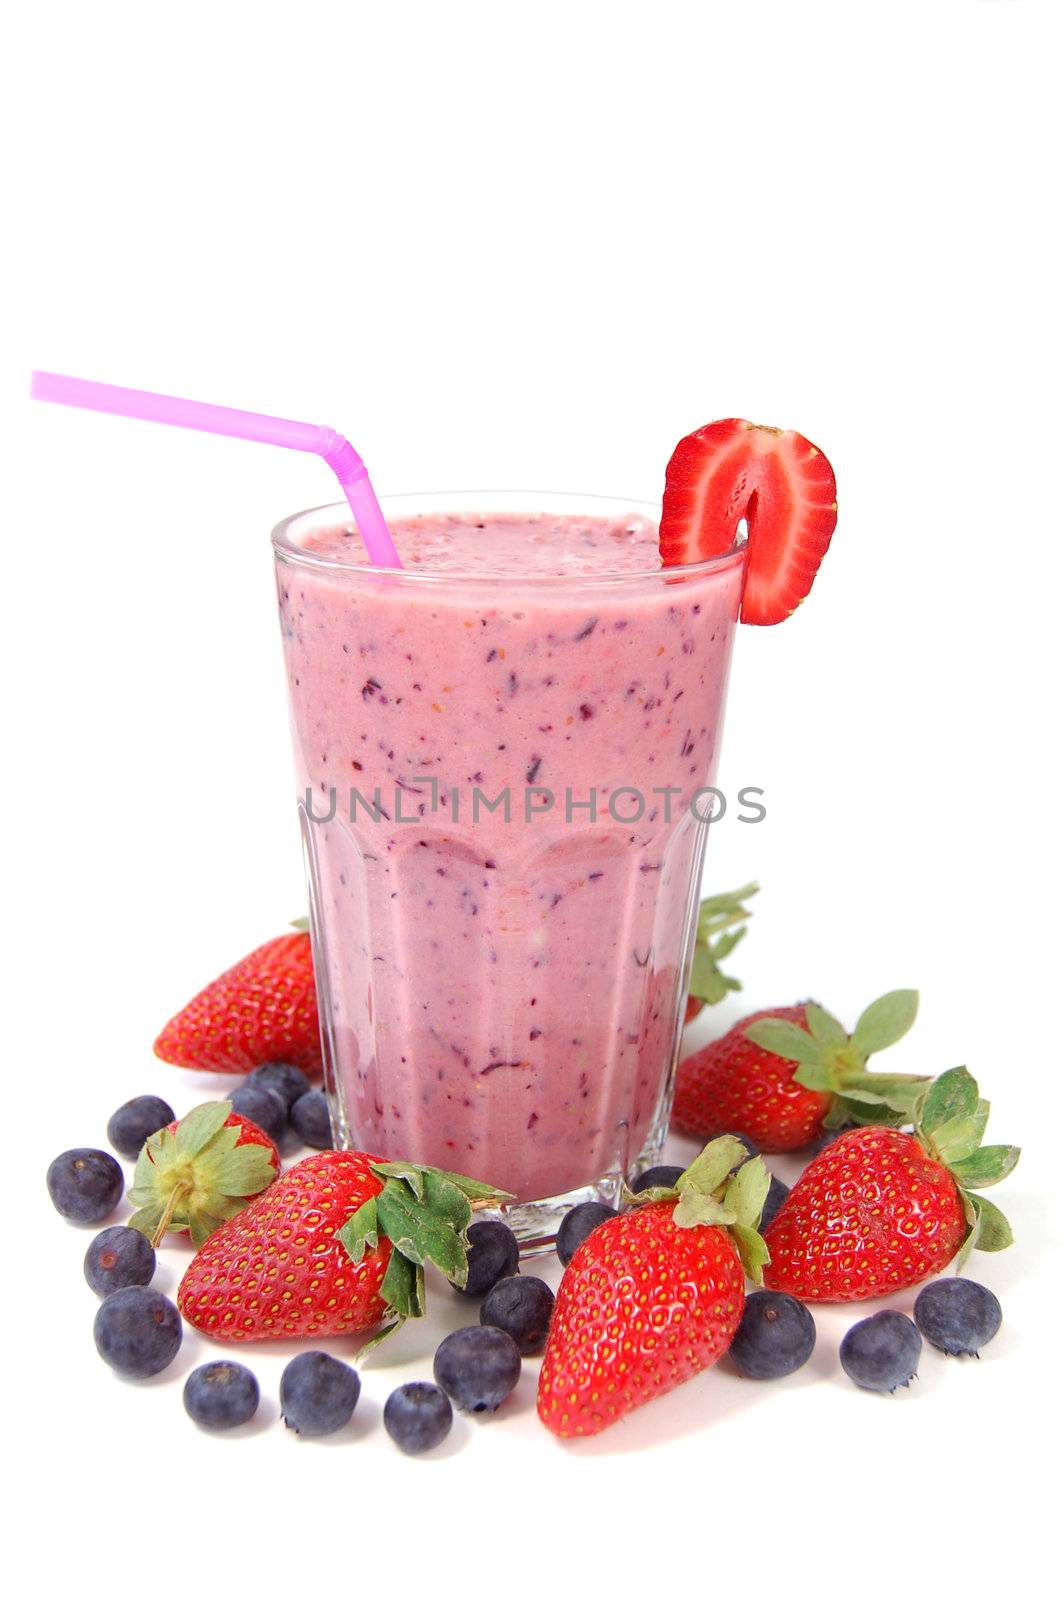 Berry smoothie by unikpix